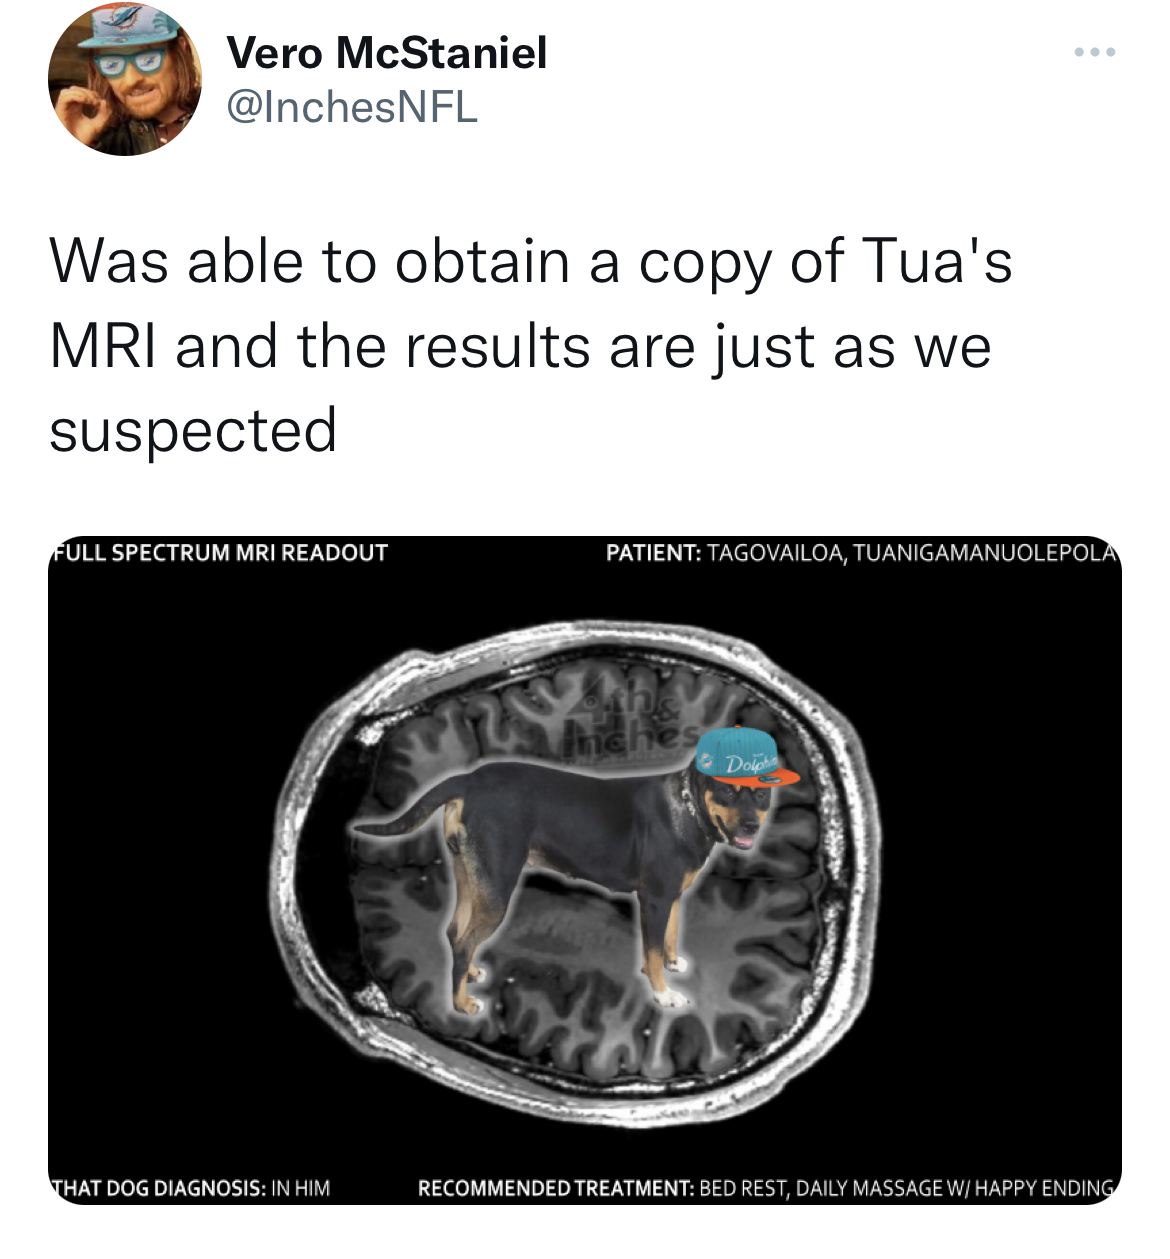 nfl memes - brain - Vero McStaniel Was able to obtain a copy of Tua's Mri and the results are just as we suspected Full Spectrum Mri Readout That Dog Diagnosis In Him Patient Tagovailoa, Tuanigamanuolepola Th Recommended Treatment Bed Rest, Daily Massage 